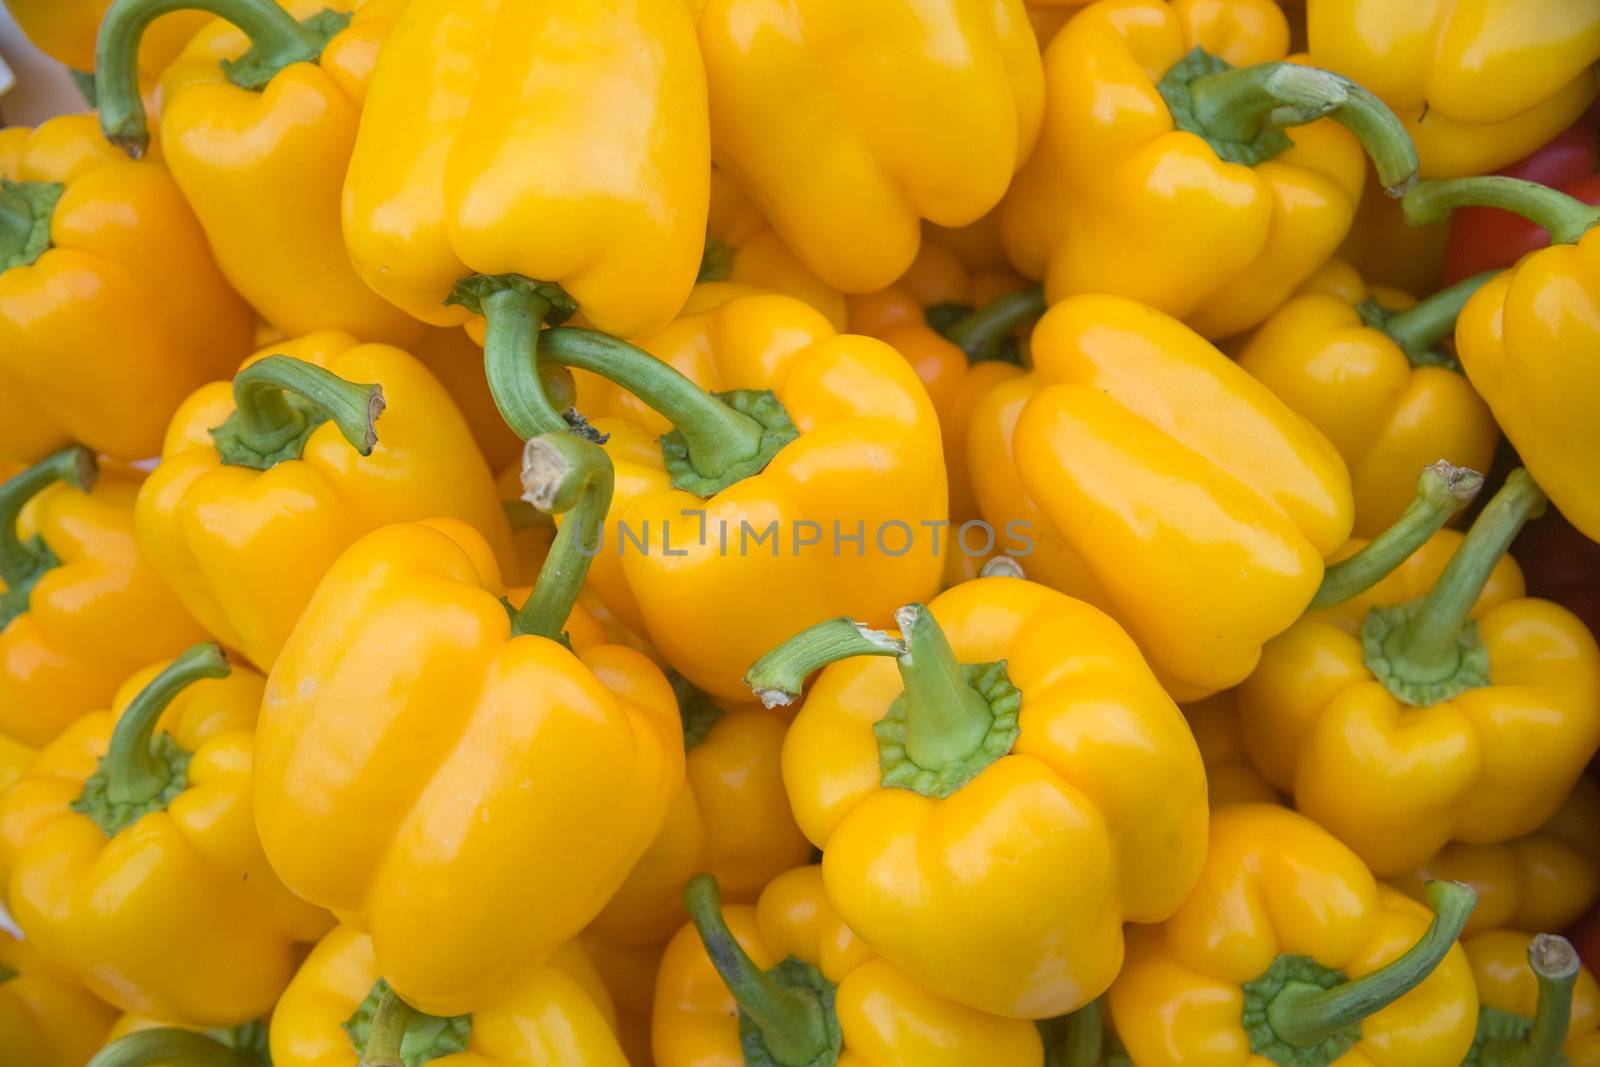 Yellow pepper vegetables on a market stall.